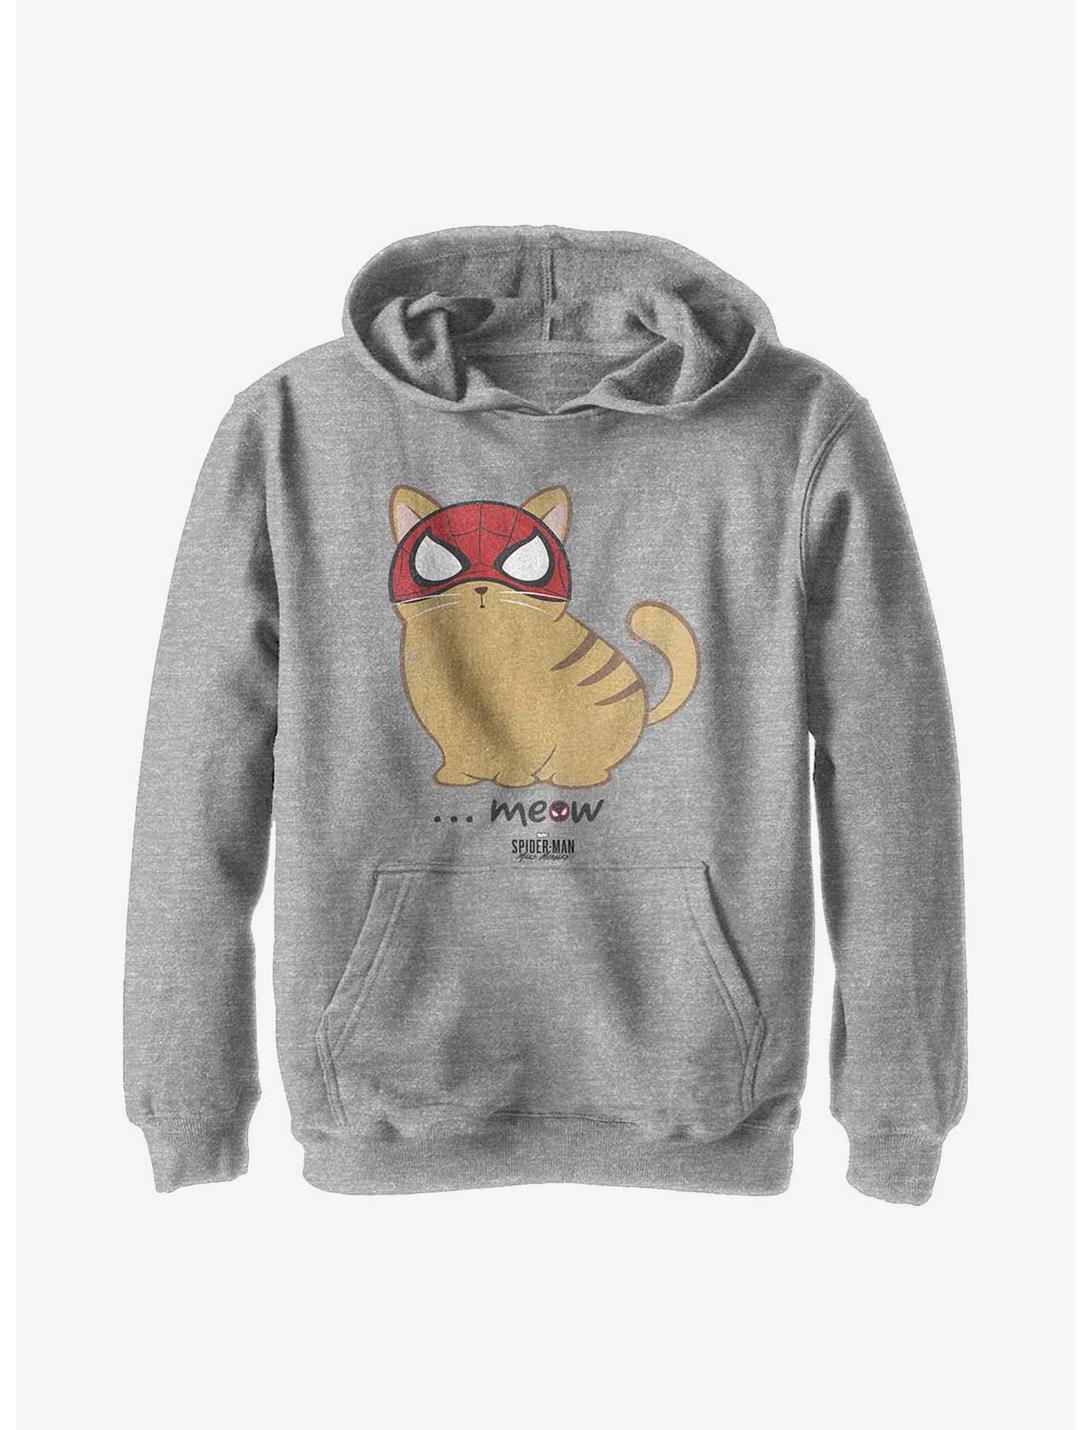 Marvel Spider-Man Hero Meow Youth Hoodie, ATH HTR, hi-res